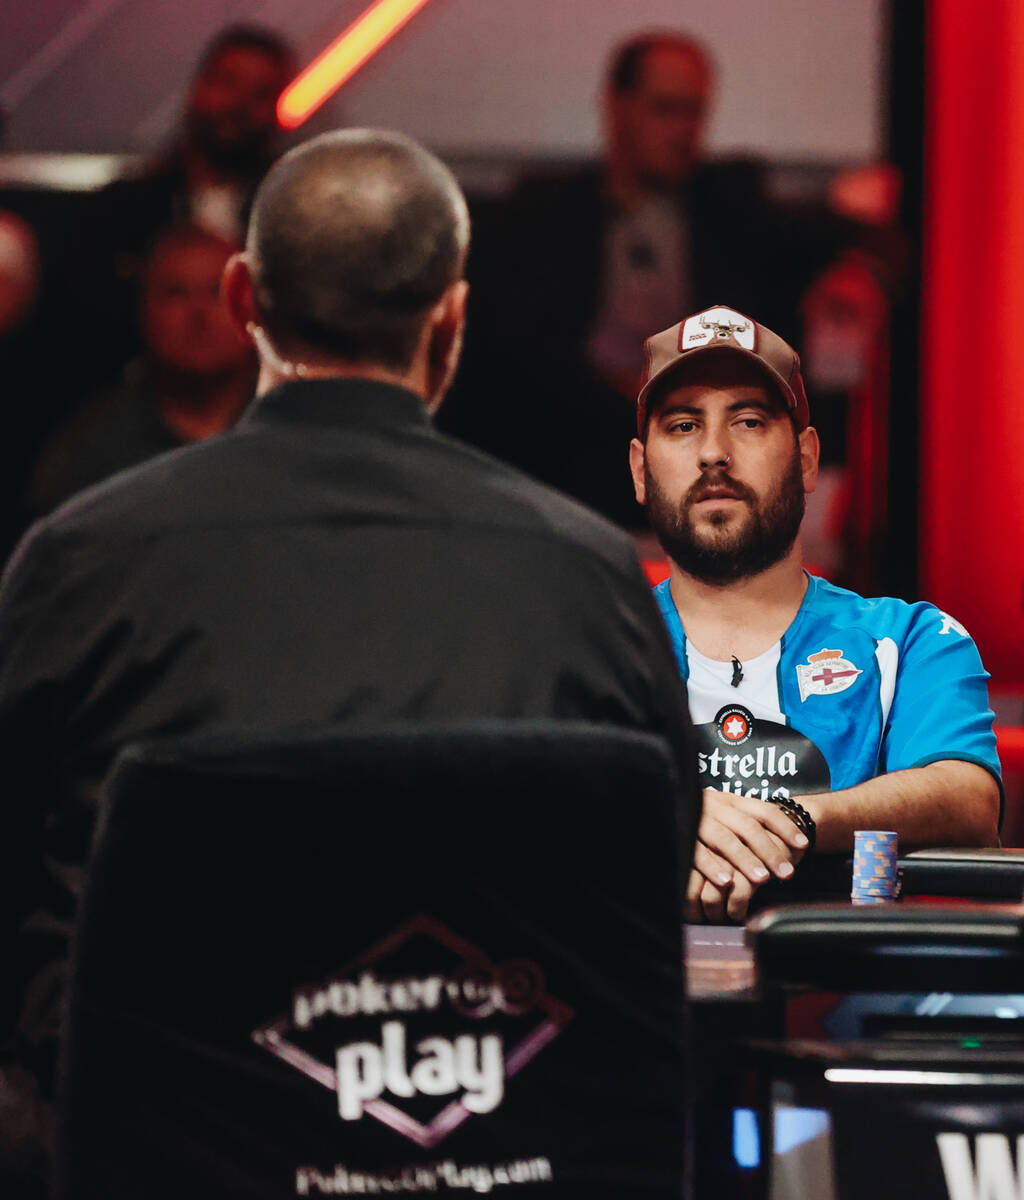 Juan Maceiras sits at a poker table during the World Series of Poker $10,000 buy-in No-limit Ho ...